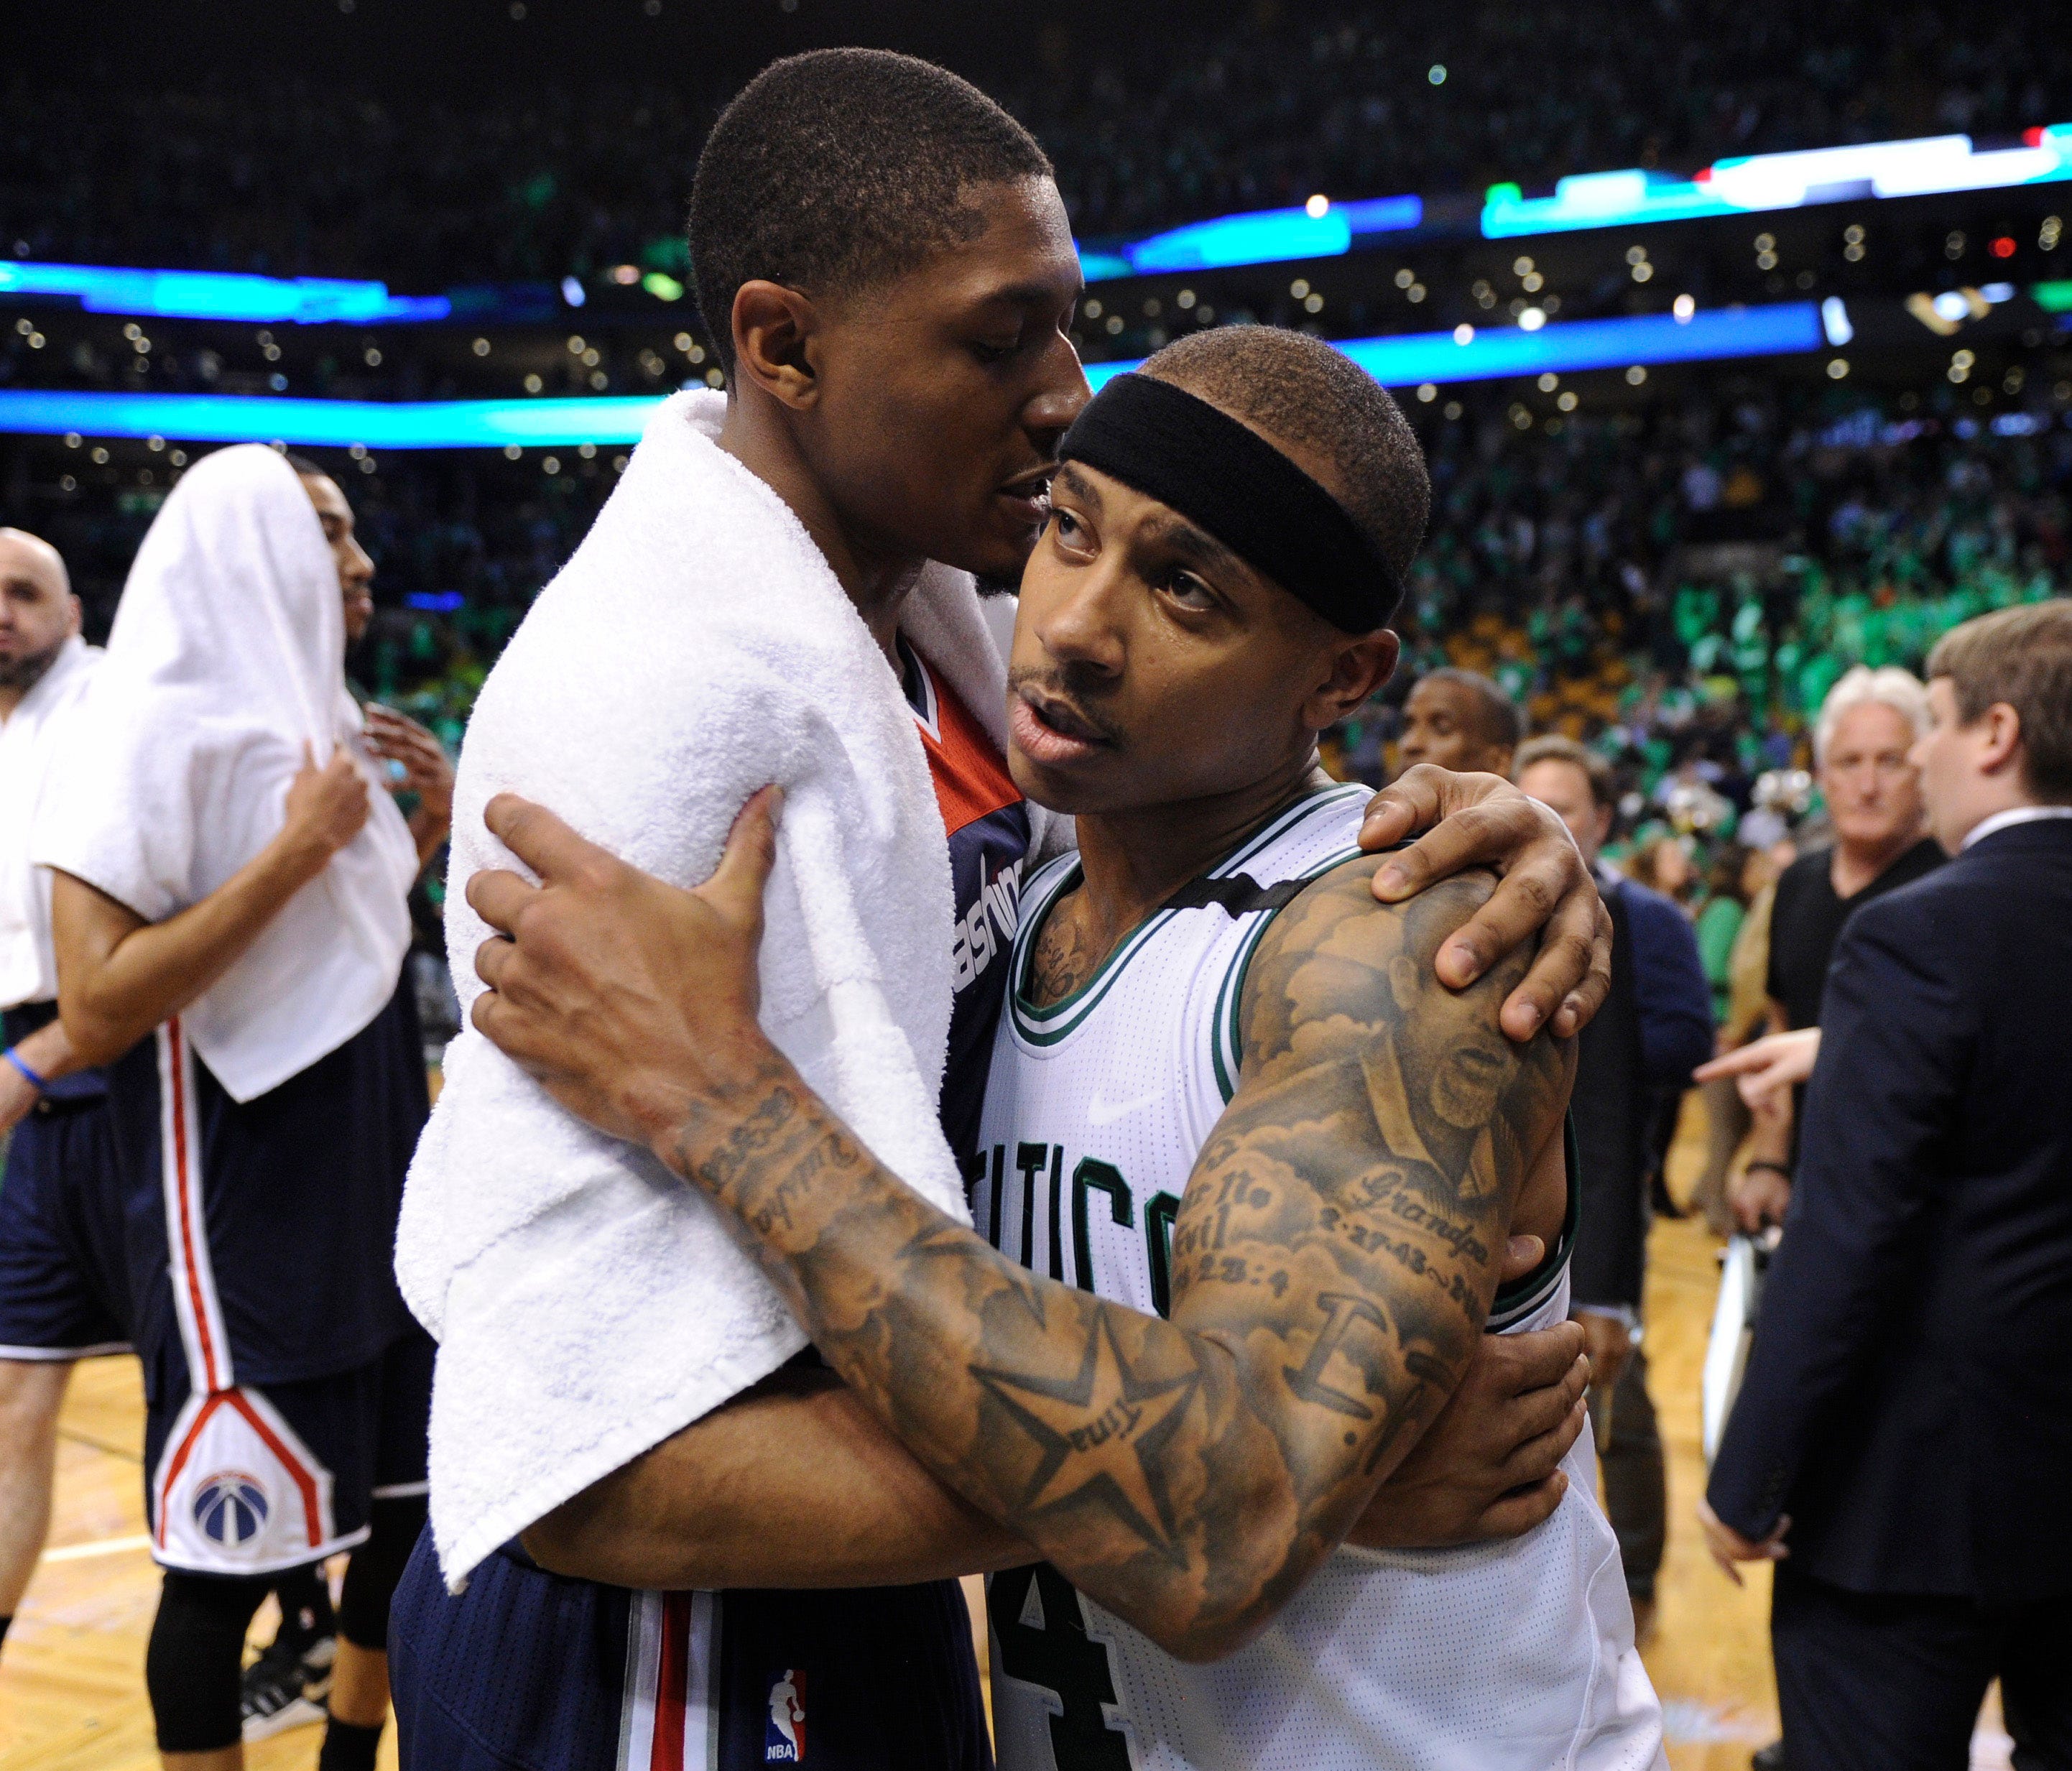 Celtics guard Isaiah Thomas, right, is congratulated by Wizards guard Bradley Beal, left, after the Celtics defeated the Wizards in Game 7 of their second-round playoff series at TD Garden in Boston.